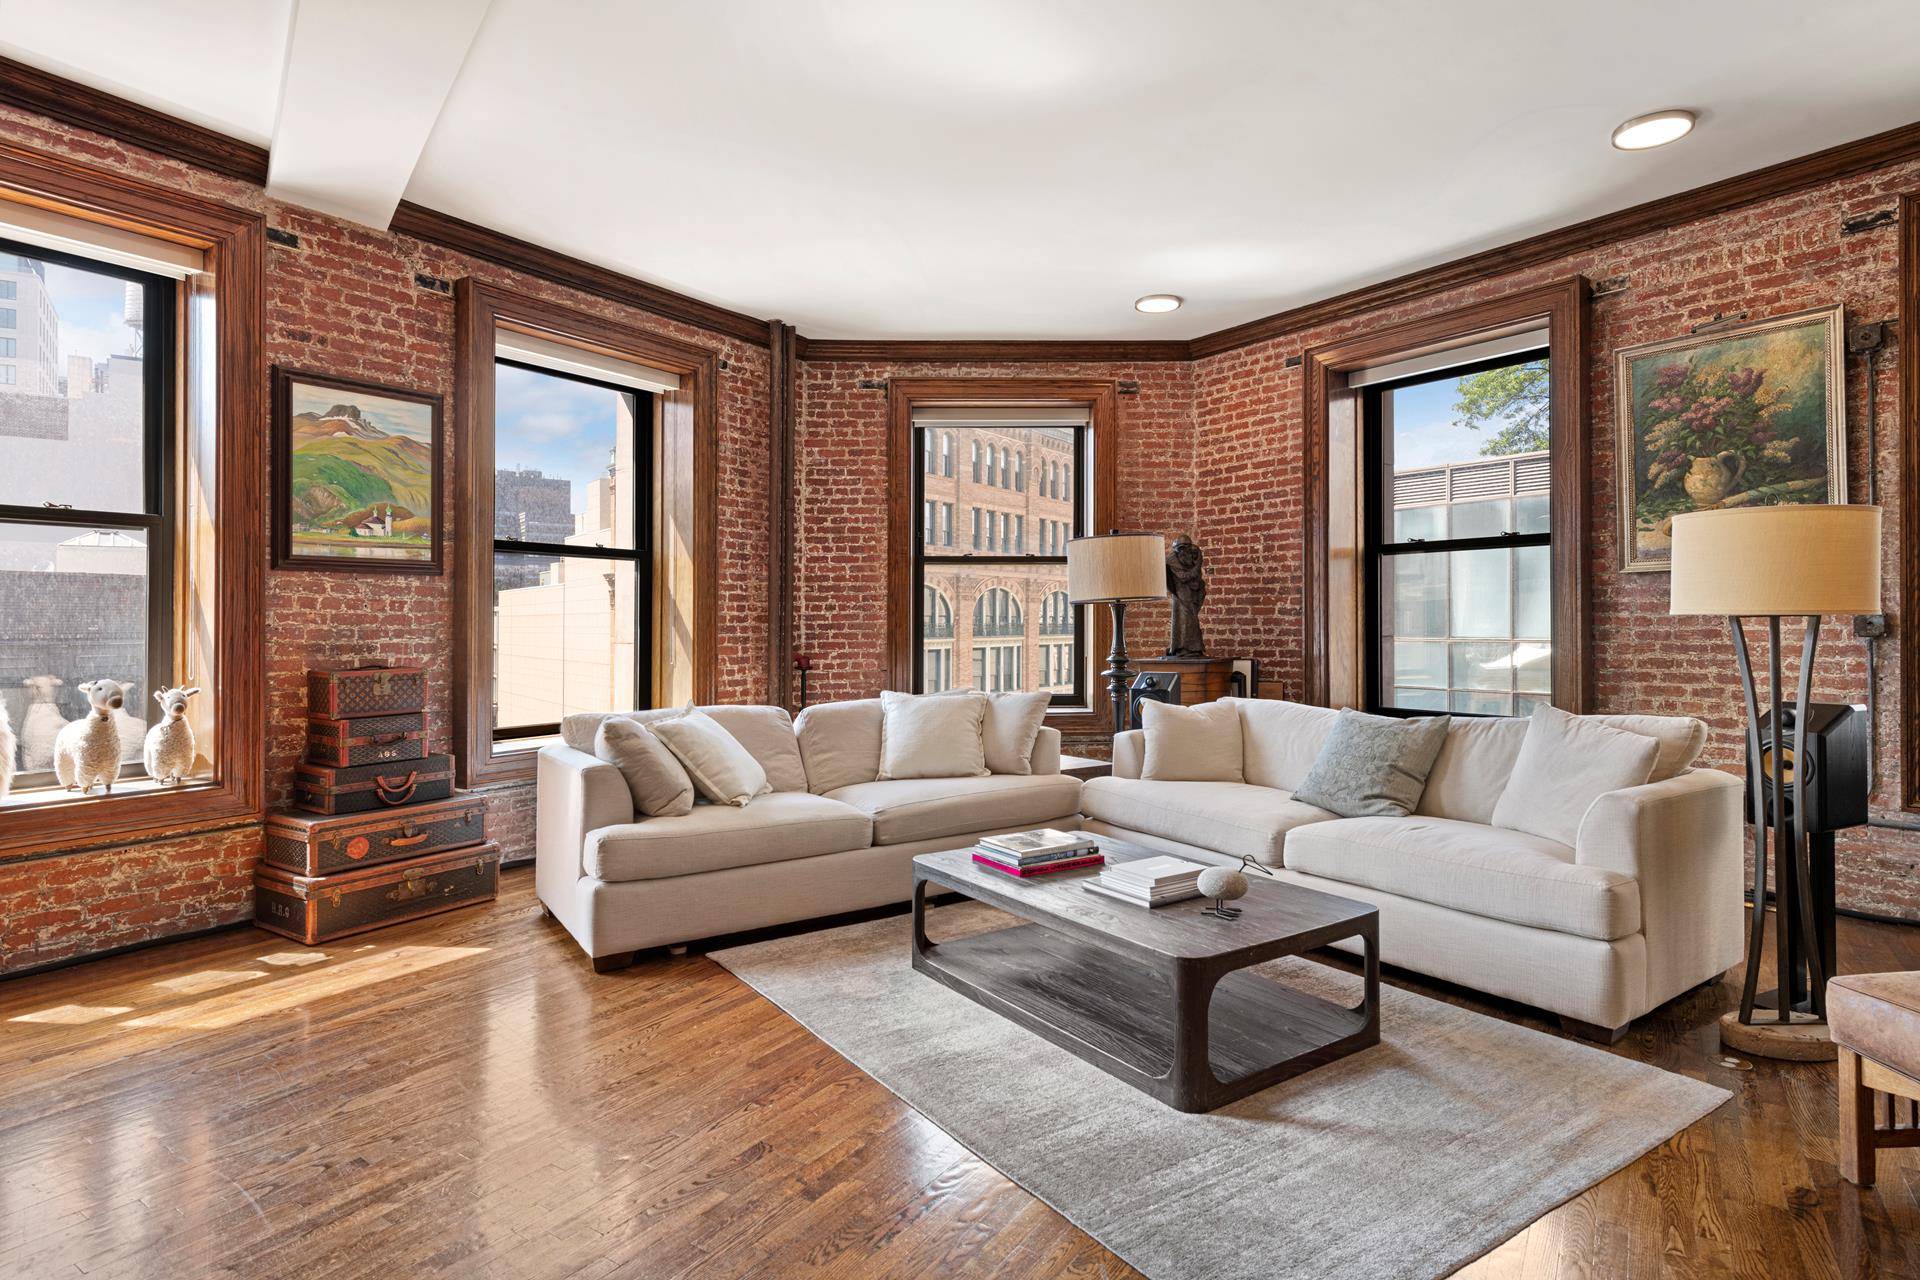 Authentic prewar 3 bedroom, 2 bath loft at the crossroads of Greenwich Village, Union Square and East Village.